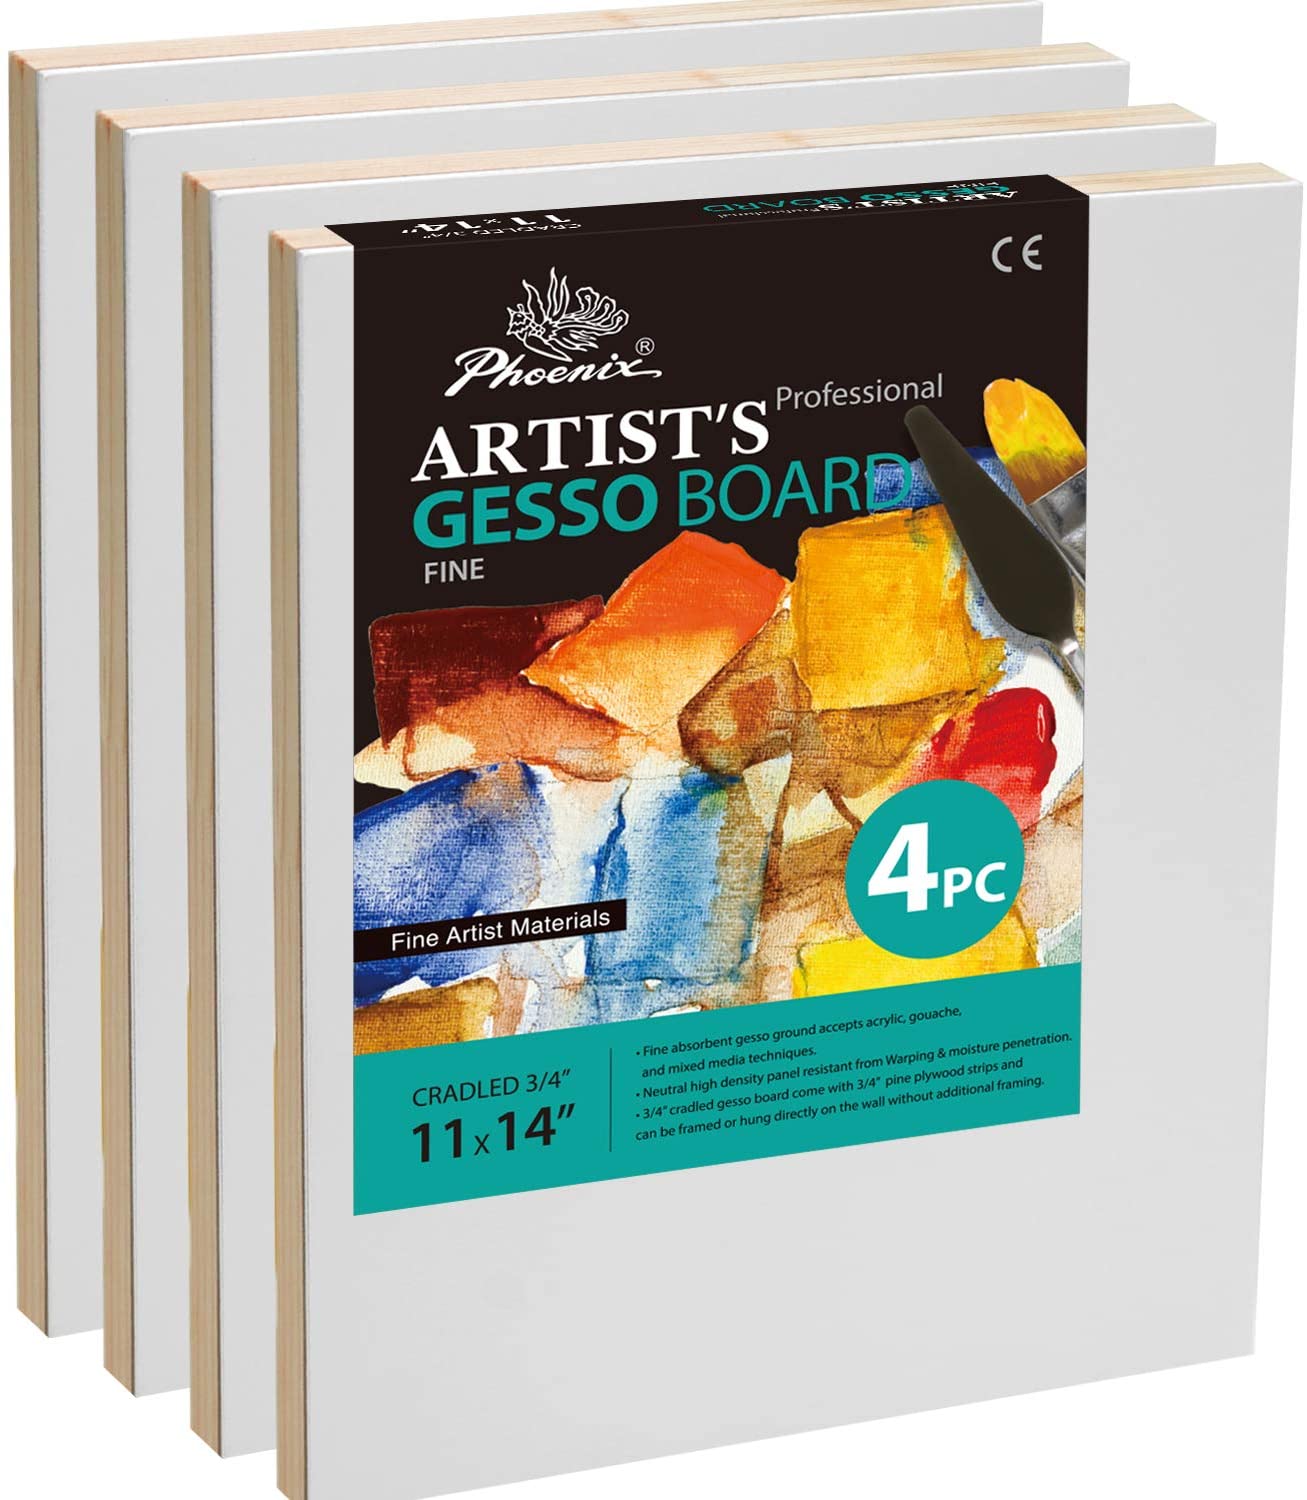 GOTIDEAL Bulk Canvases for Painting, 11x14 inch Value Pack of 40, Gess –  WoodArtSupply